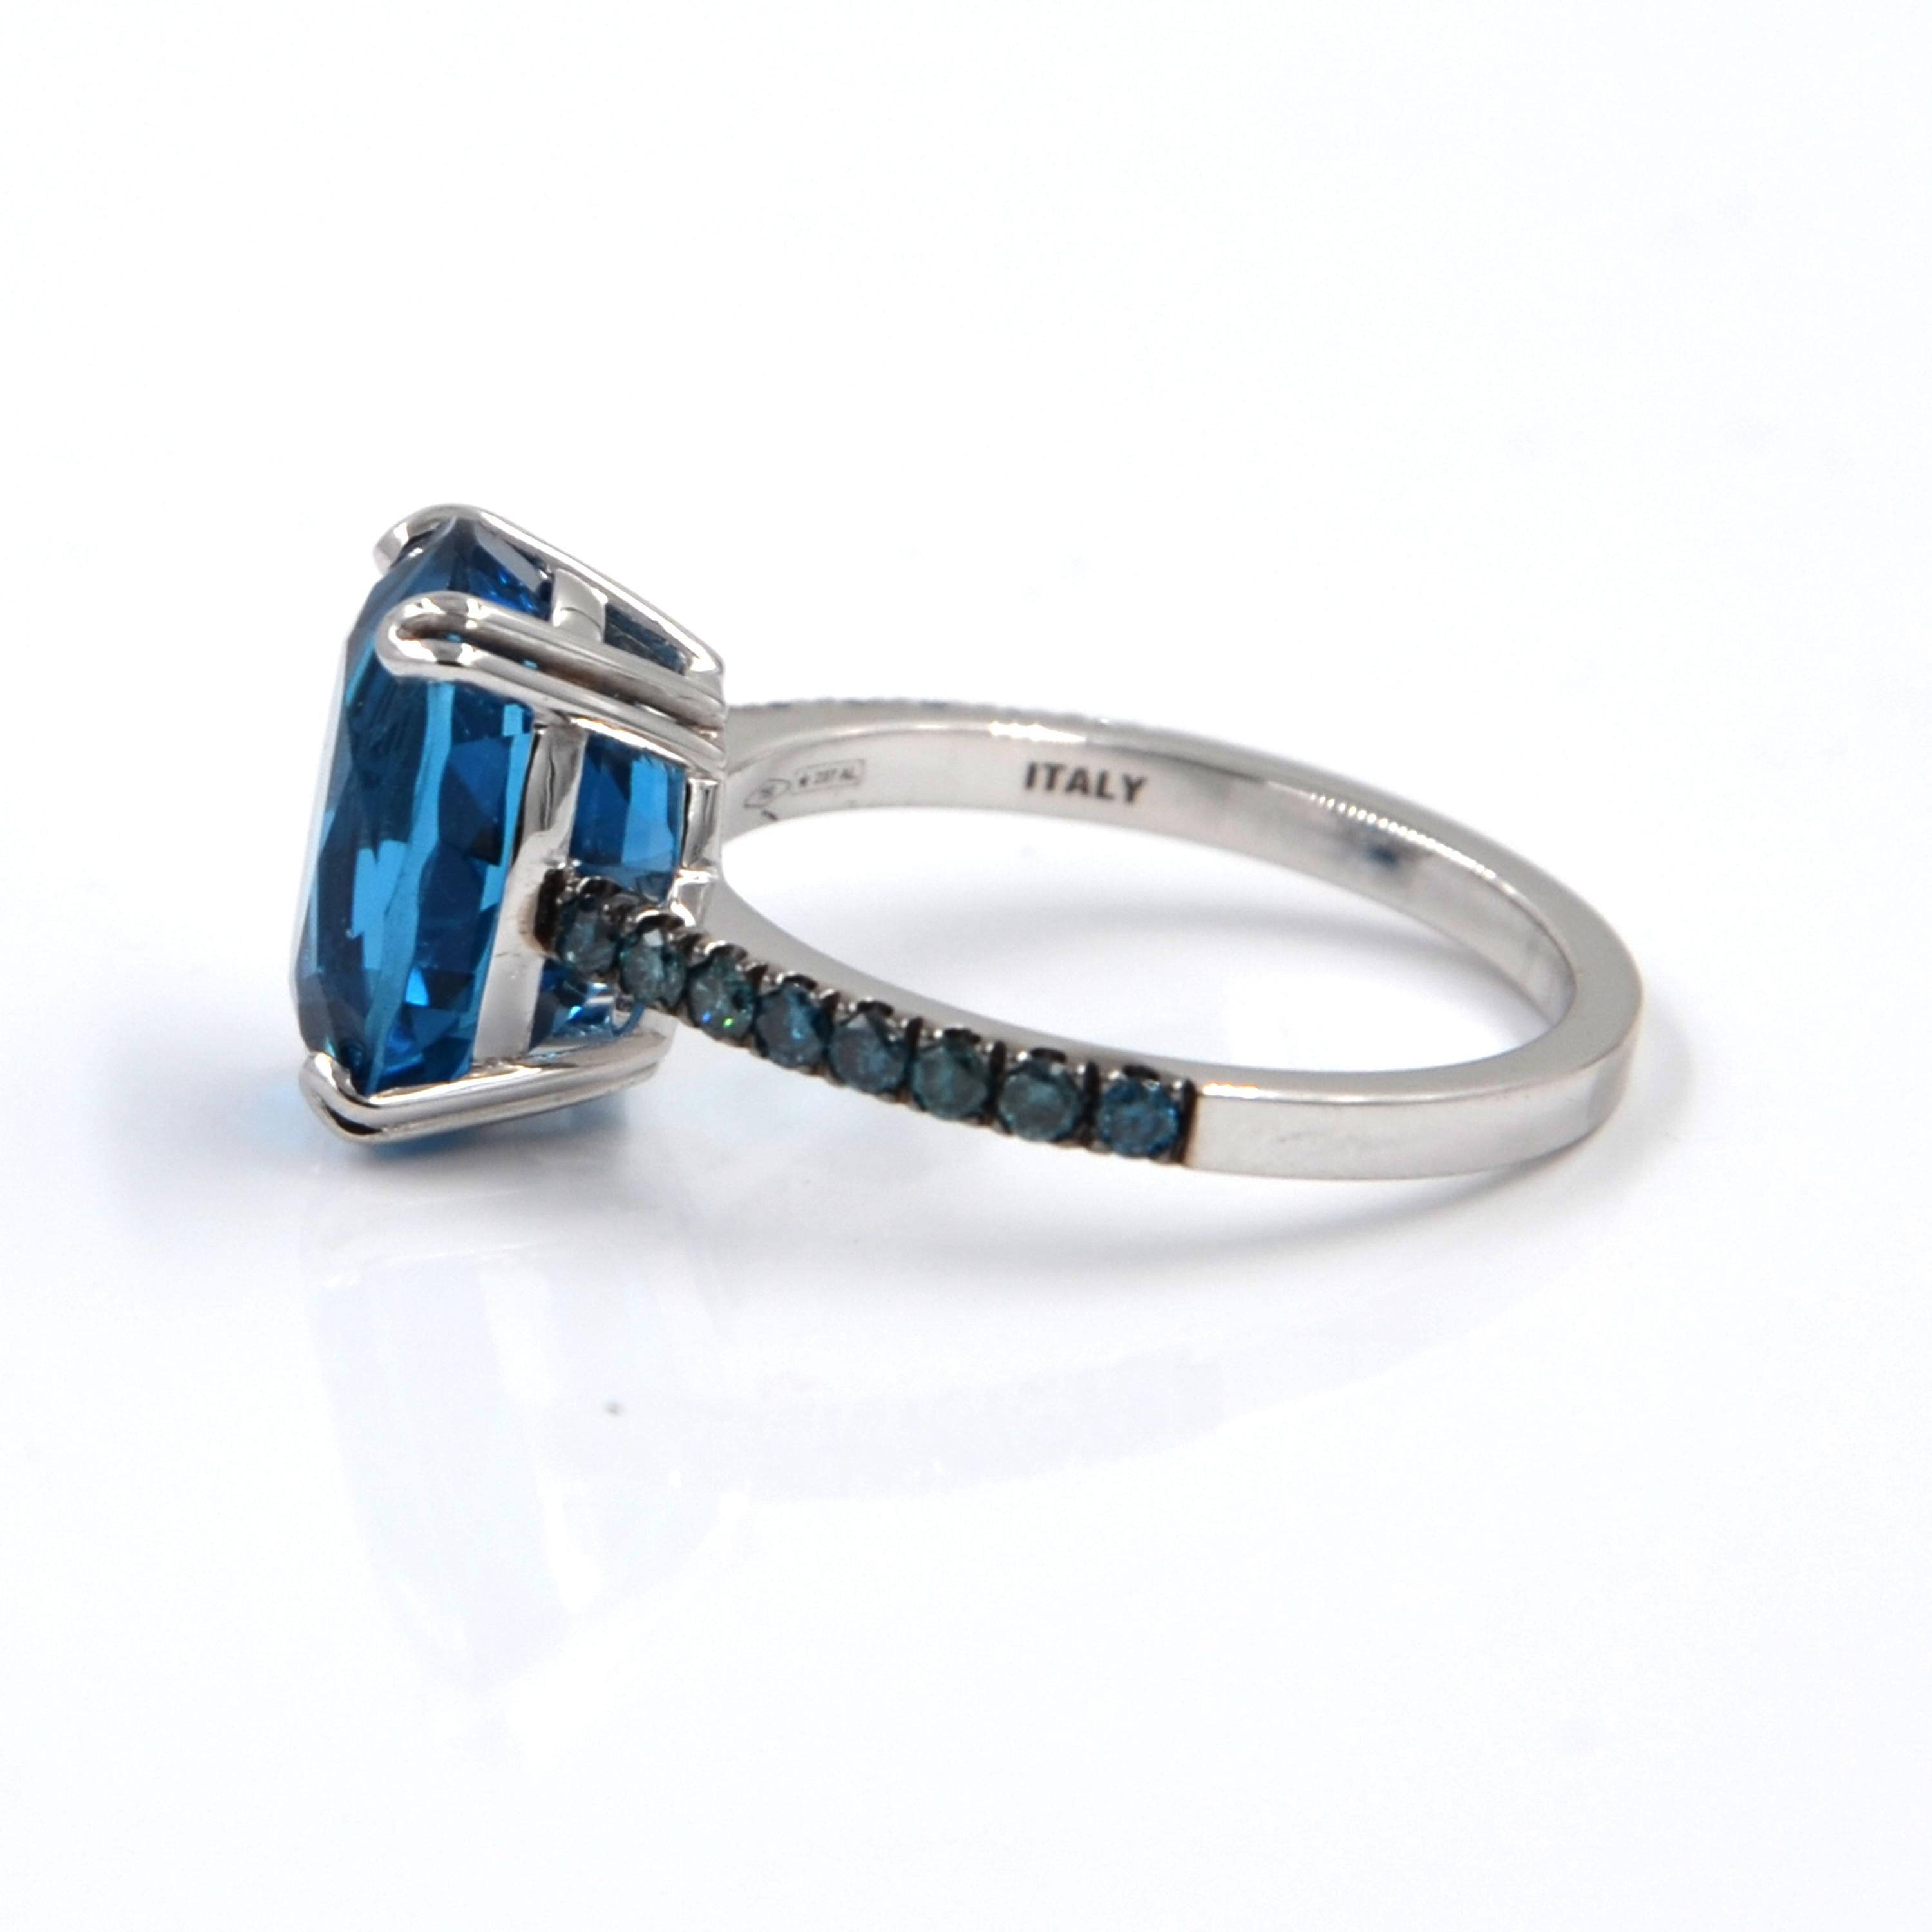 18KT White Gold  LONDON BLUE TOPAZ AND BLUE SAPPHIRES GARAVELLI RING 
Ovale shape blue topaz mm 12x9 ct : 5,77
GOLD gr : 2,95
Blue SAPPHIRES ct : 0,40 
ring size 55